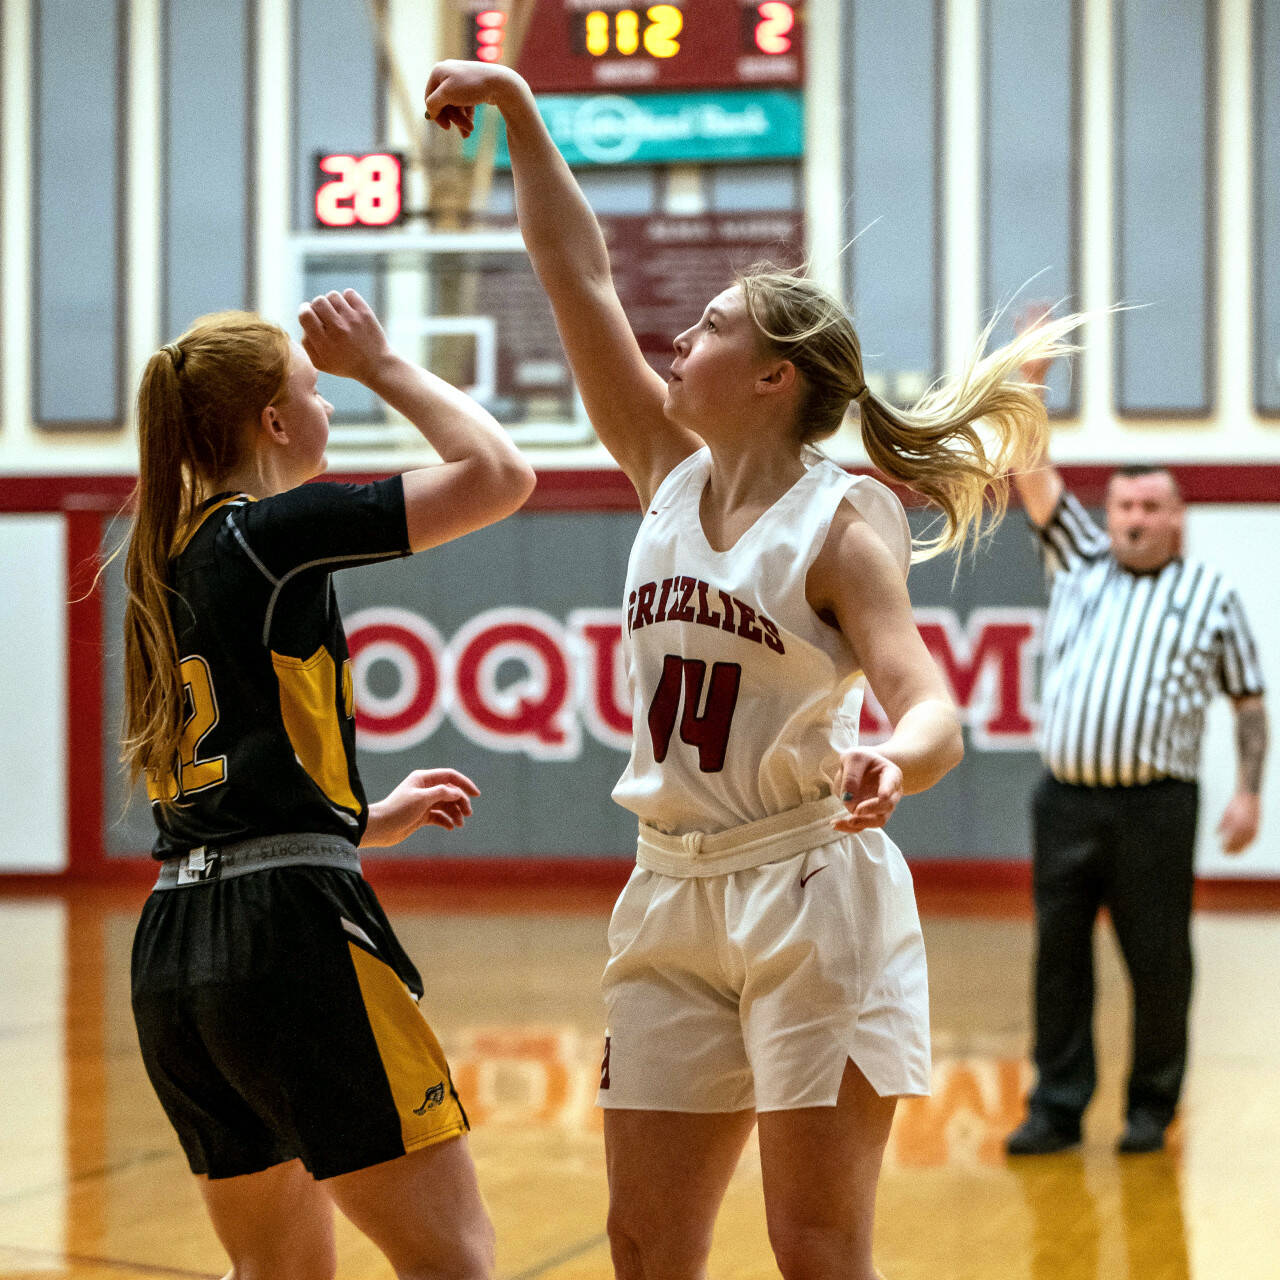 PHOTO BY FOREST WORGUM Hoquiam senior guard Ella Folkers (14) shoots over North Beach’s Kaci Osborne-Hansen during the Grizzlies’ 48-6 win on Friday in Hoquiam. Folkers finished with a game high 15 points in the contest.